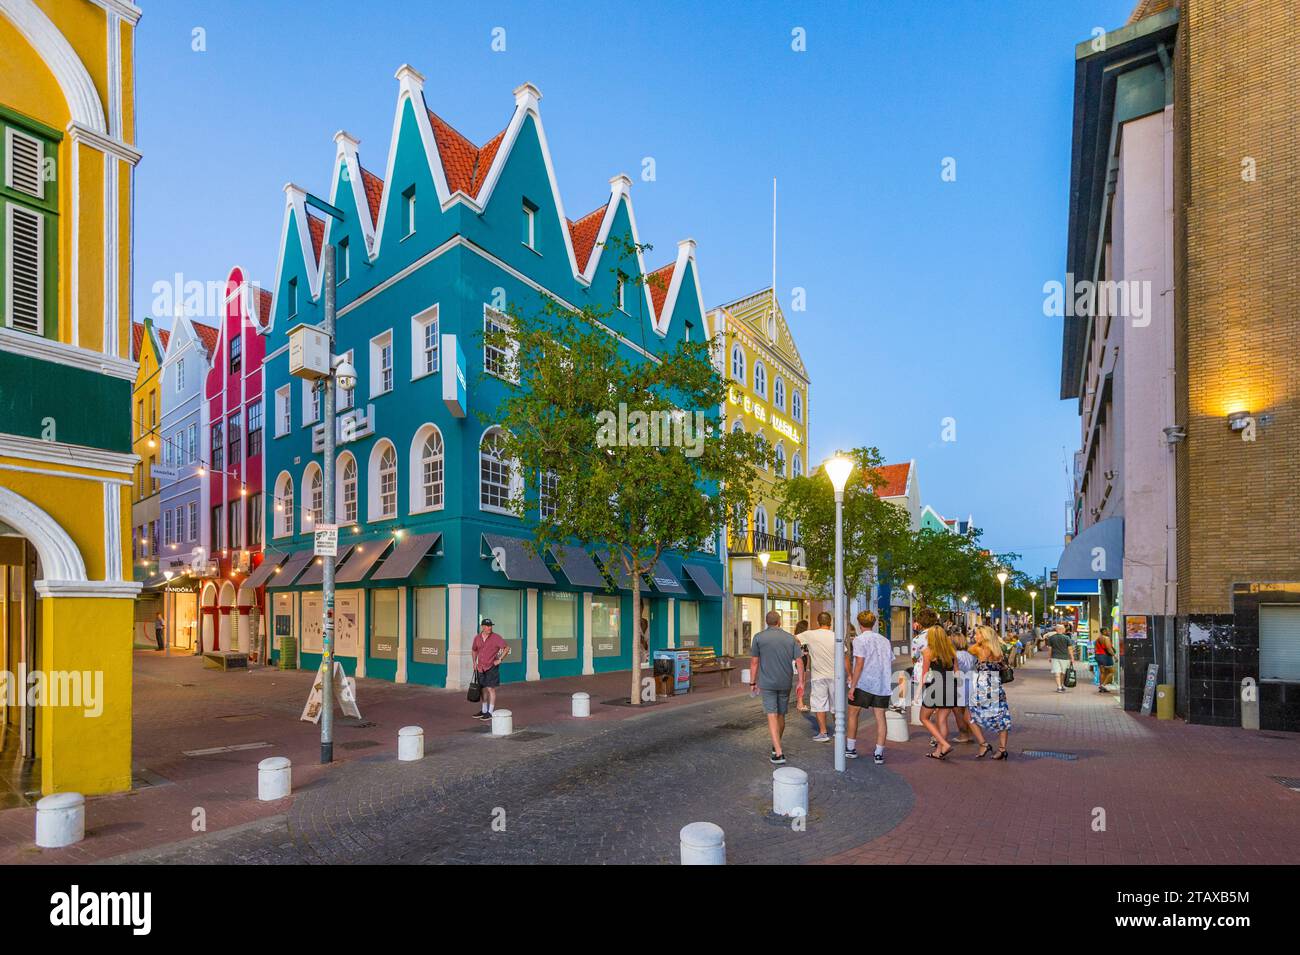 Willemstad Curacao, soir Banque D'Images